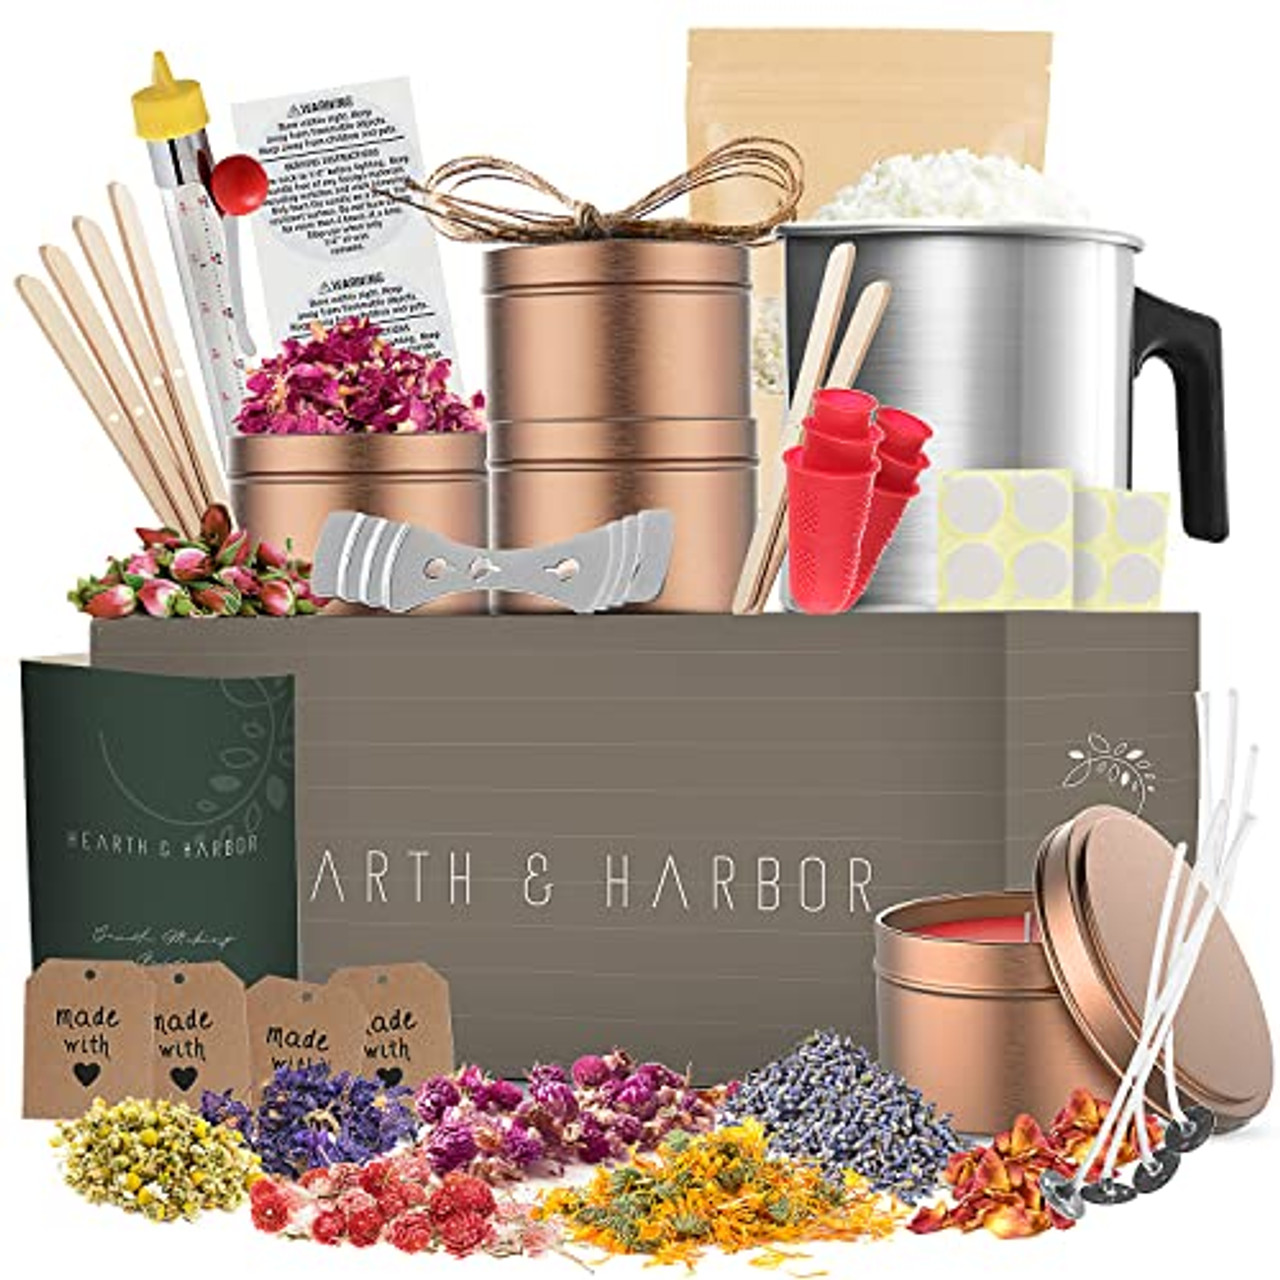 Hearth & Harbor Soy Candle Making Kit - Candle Wax for Candle